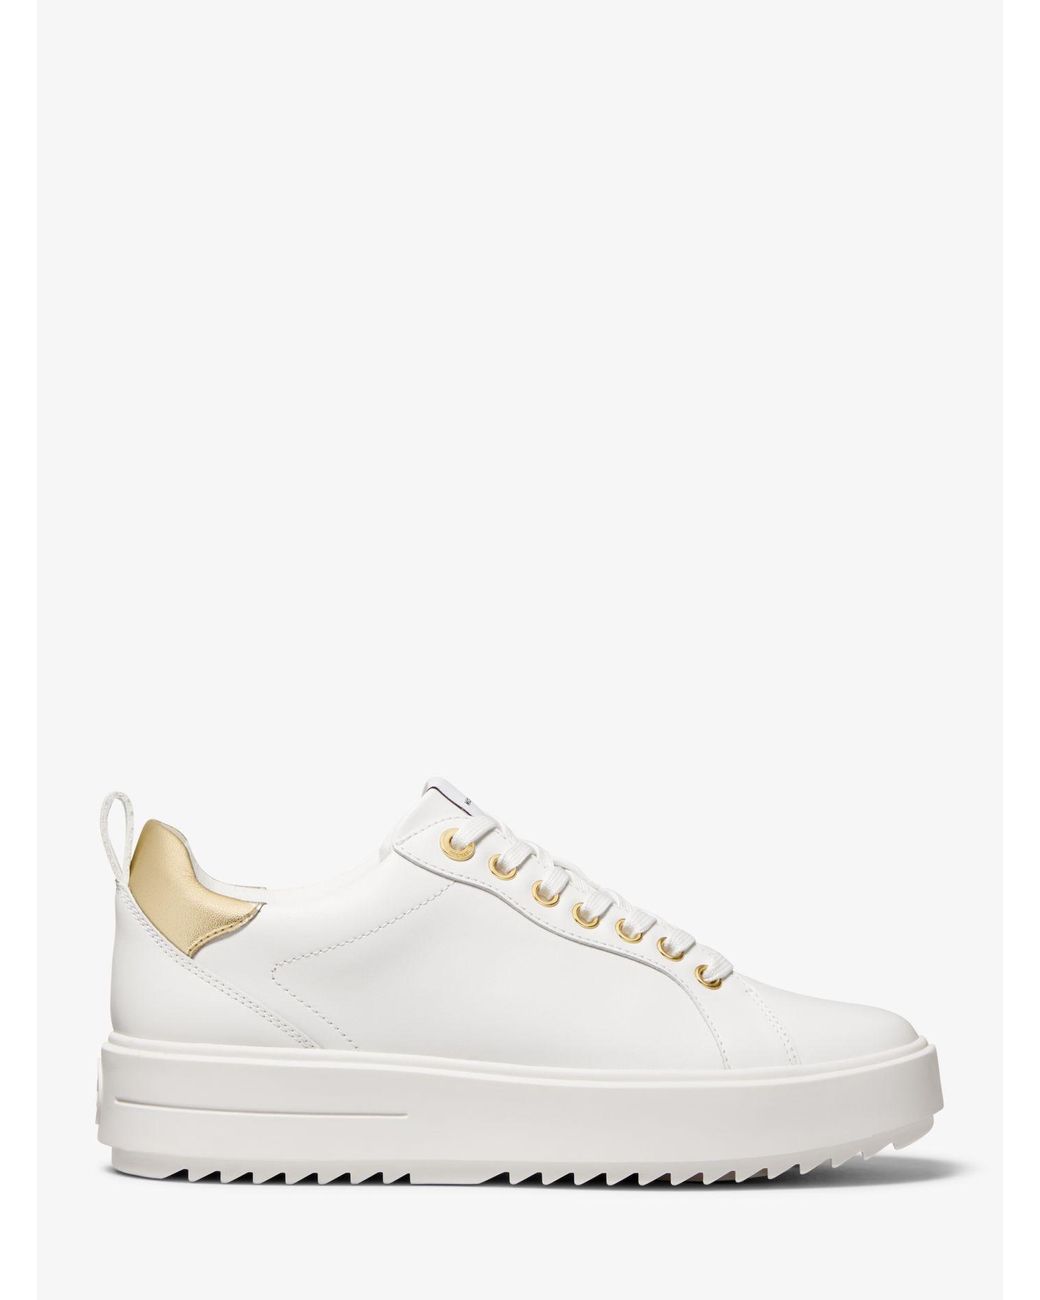 Michael Kors Emmett Leather Trainers in White Lyst